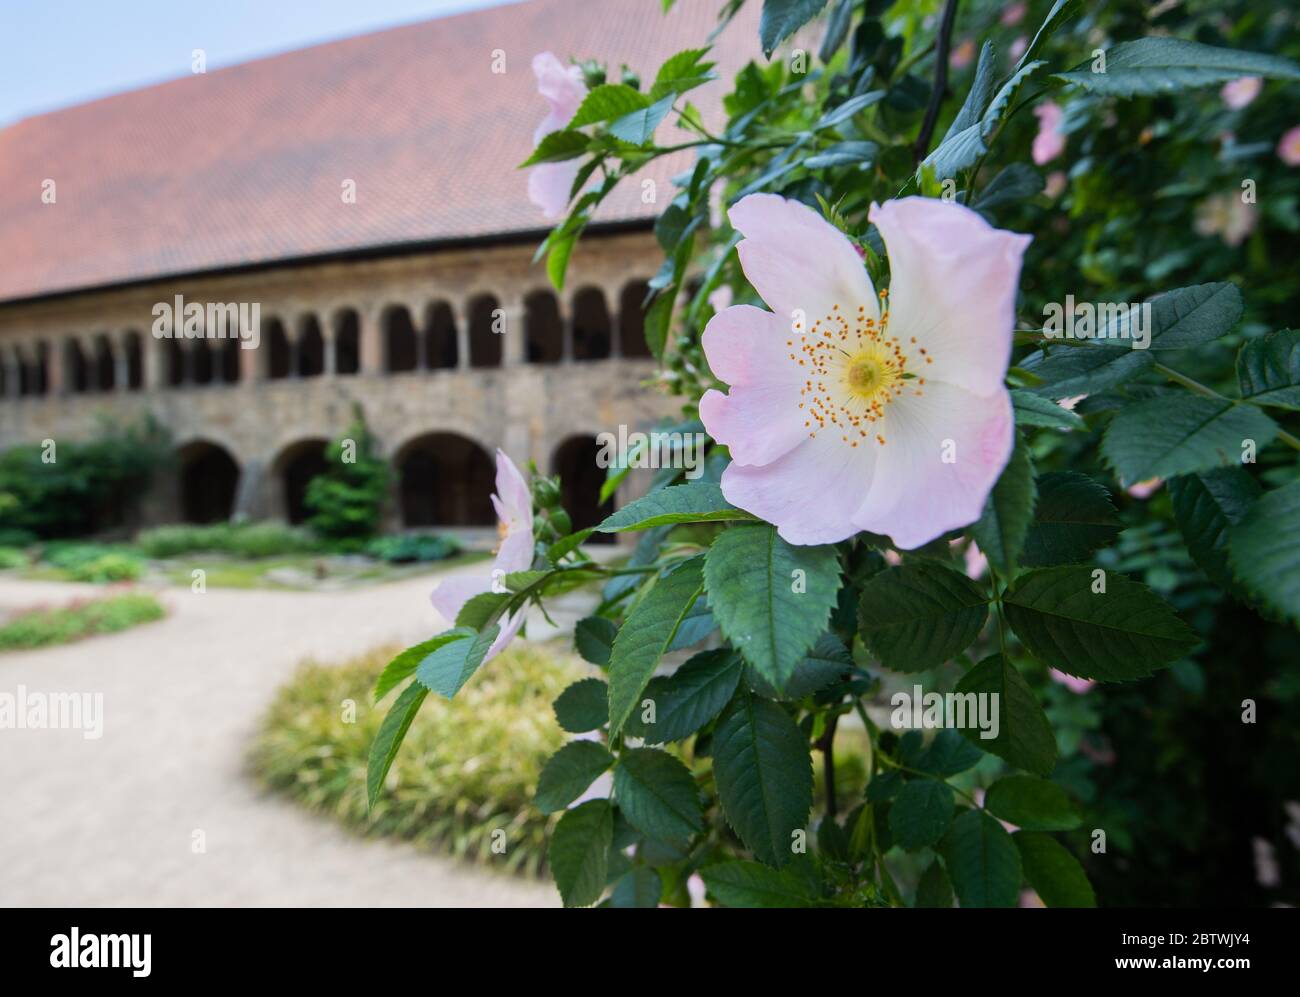 Hildesheim, Germany. 27th May, 2020. The "1000 year old rosebush" is  blooming at the Hildesheim cathedral (r) next to a cloister. The wild hedge  rose at the church wall is in full